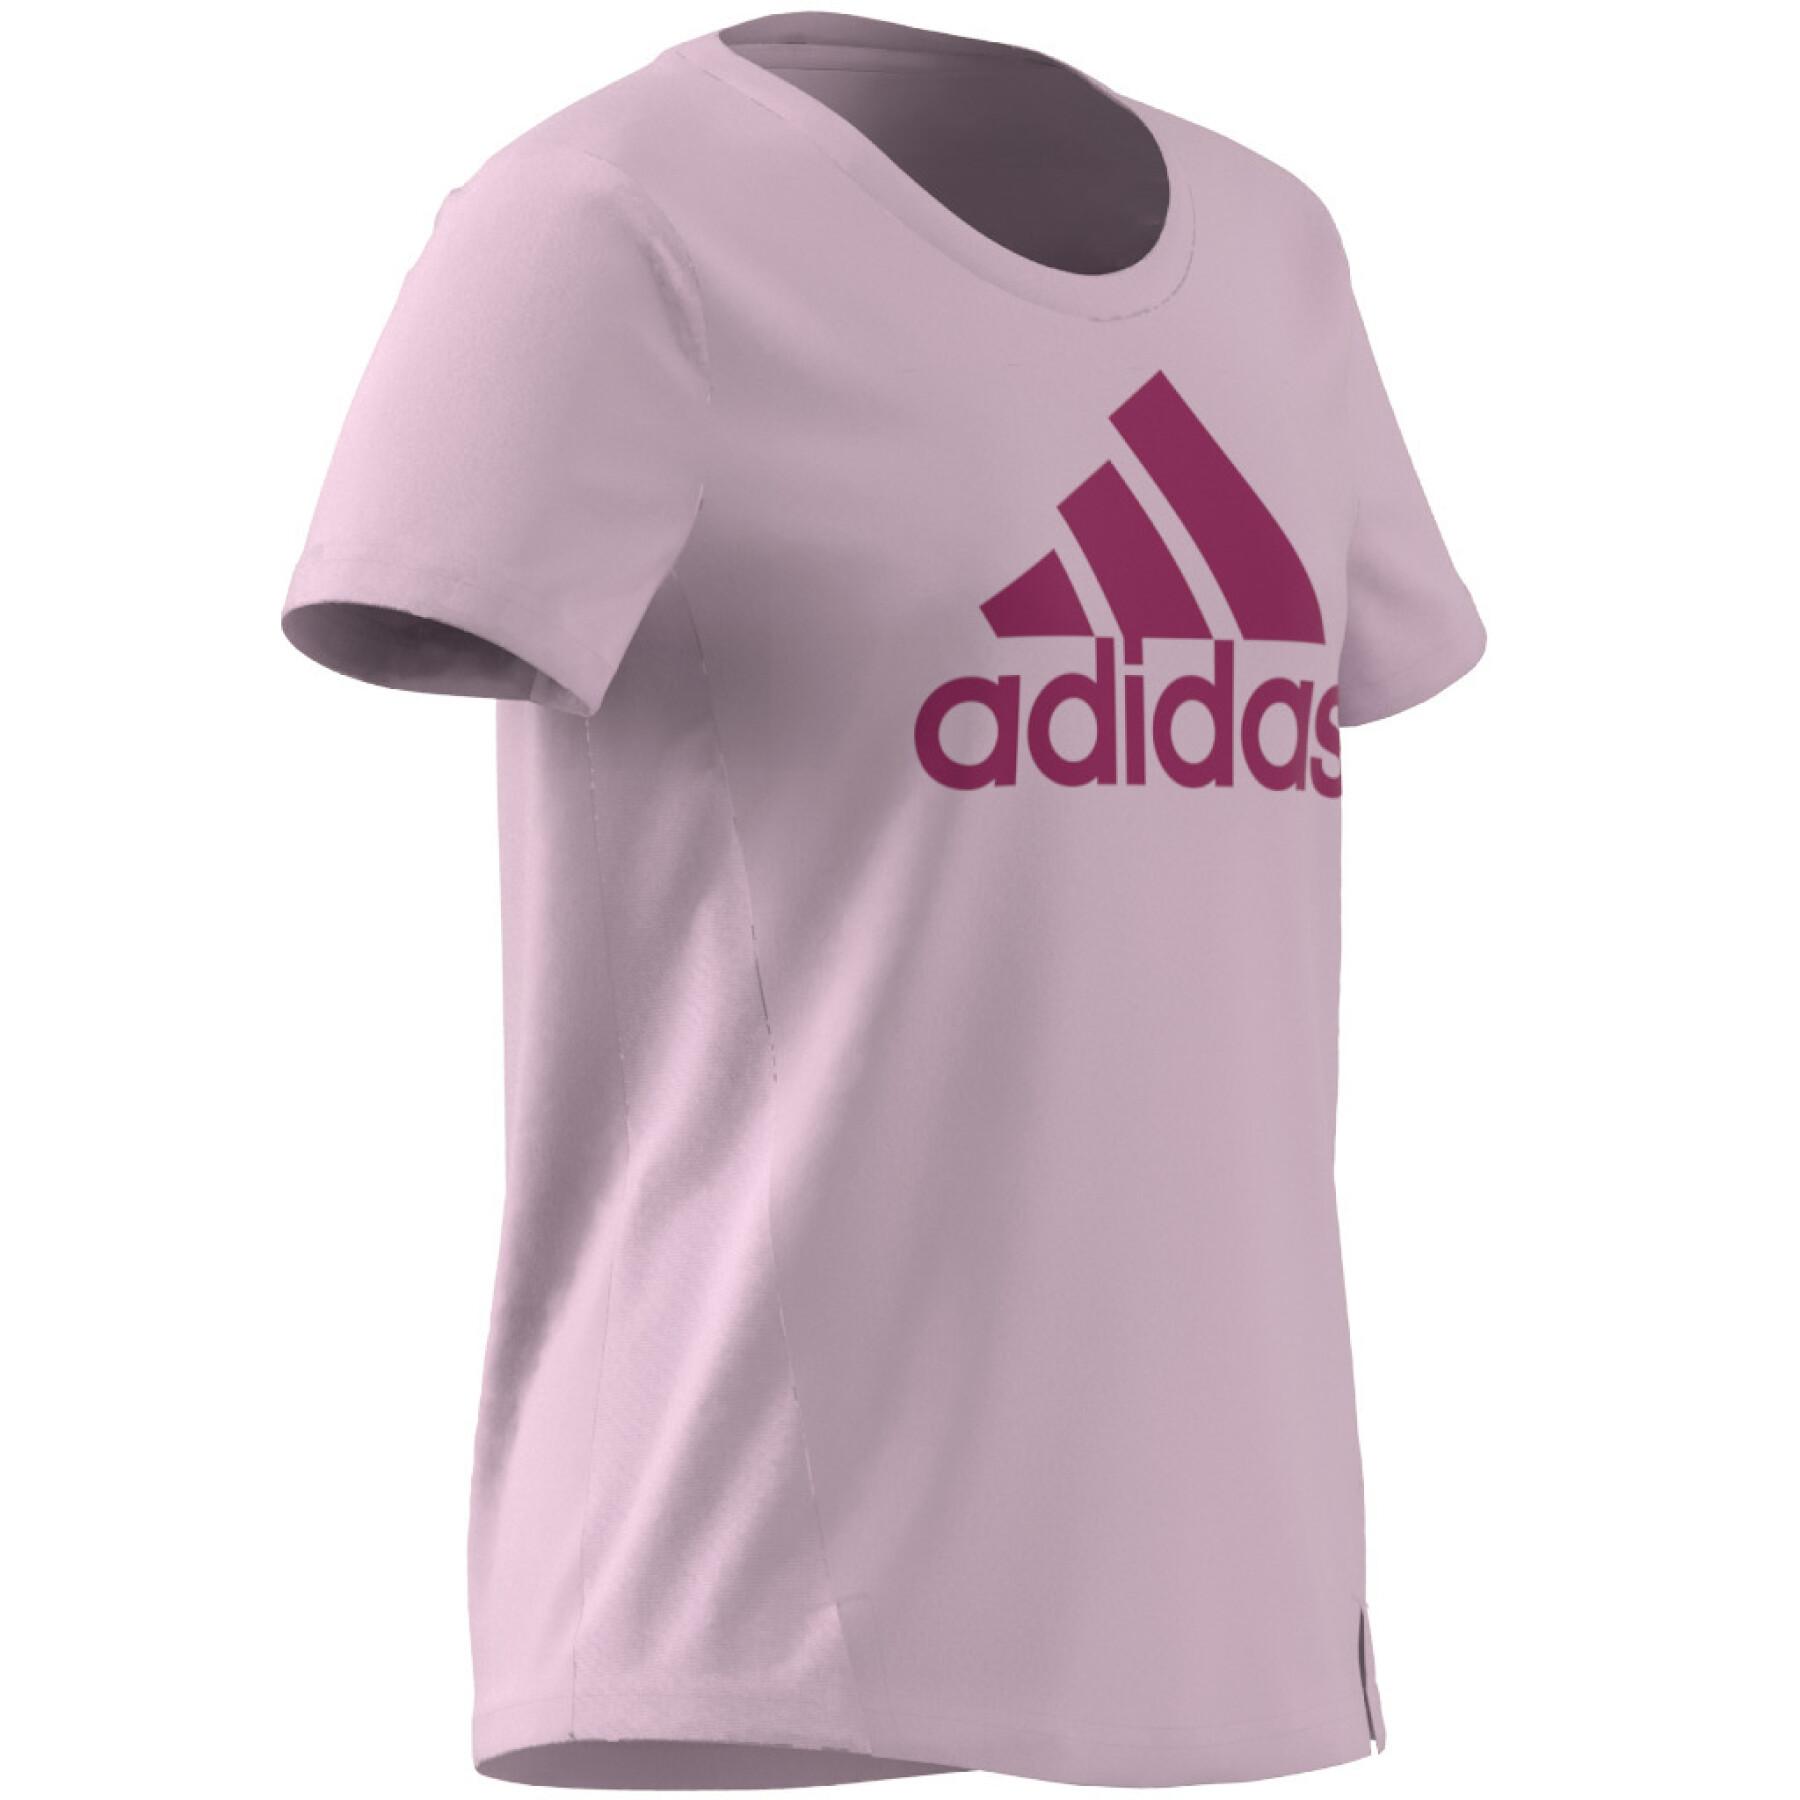 Girl's jersey adidas To Move